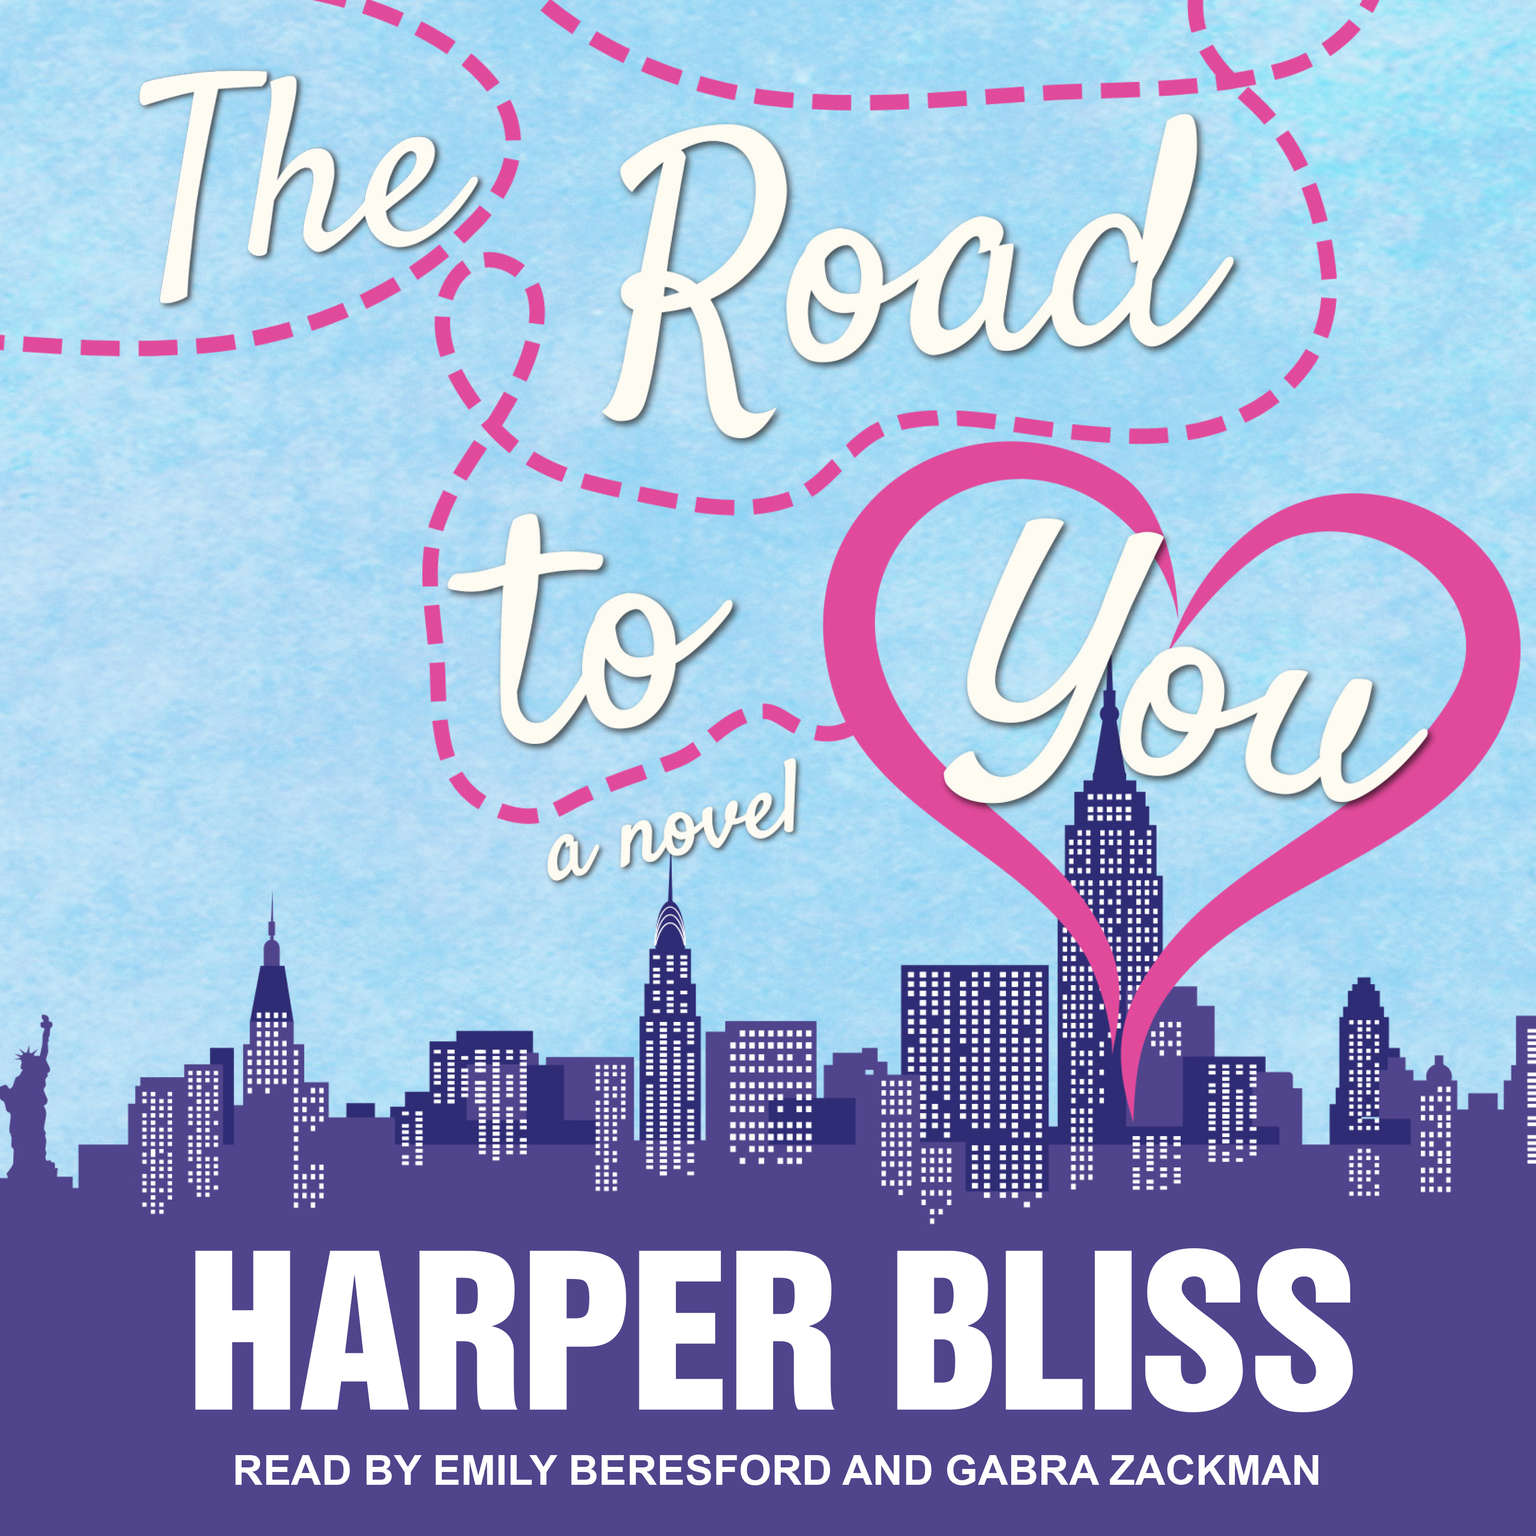 Harper Bliss, Gabra Zackman: The Road to You (AudiobookFormat, 2017, Ladylit)